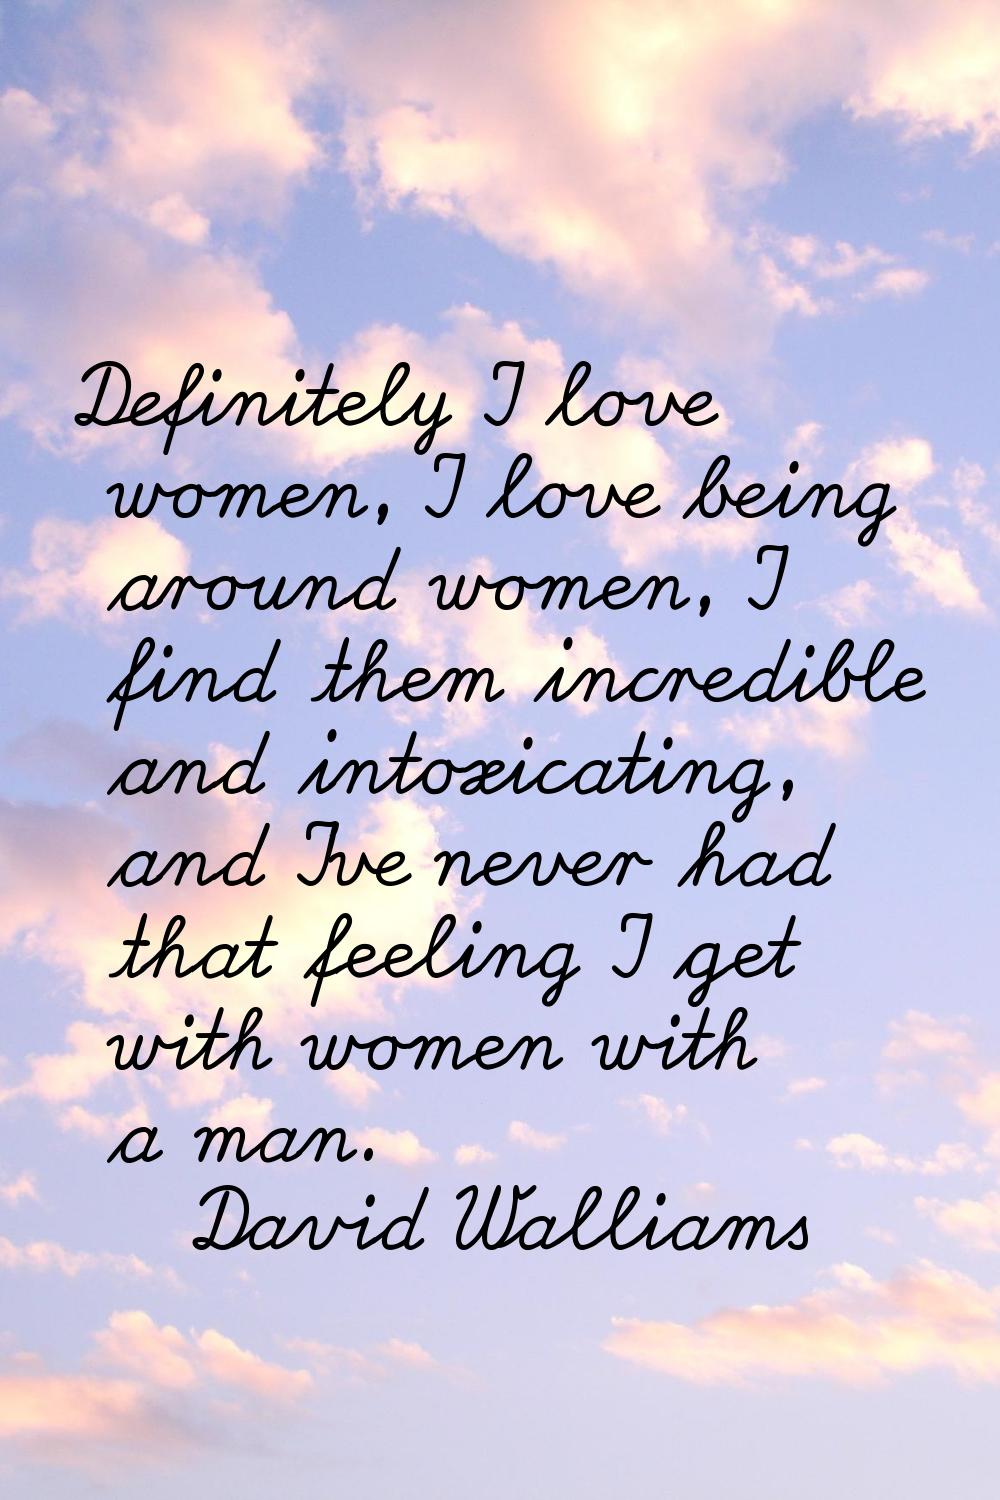 Definitely I love women, I love being around women, I find them incredible and intoxicating, and I'